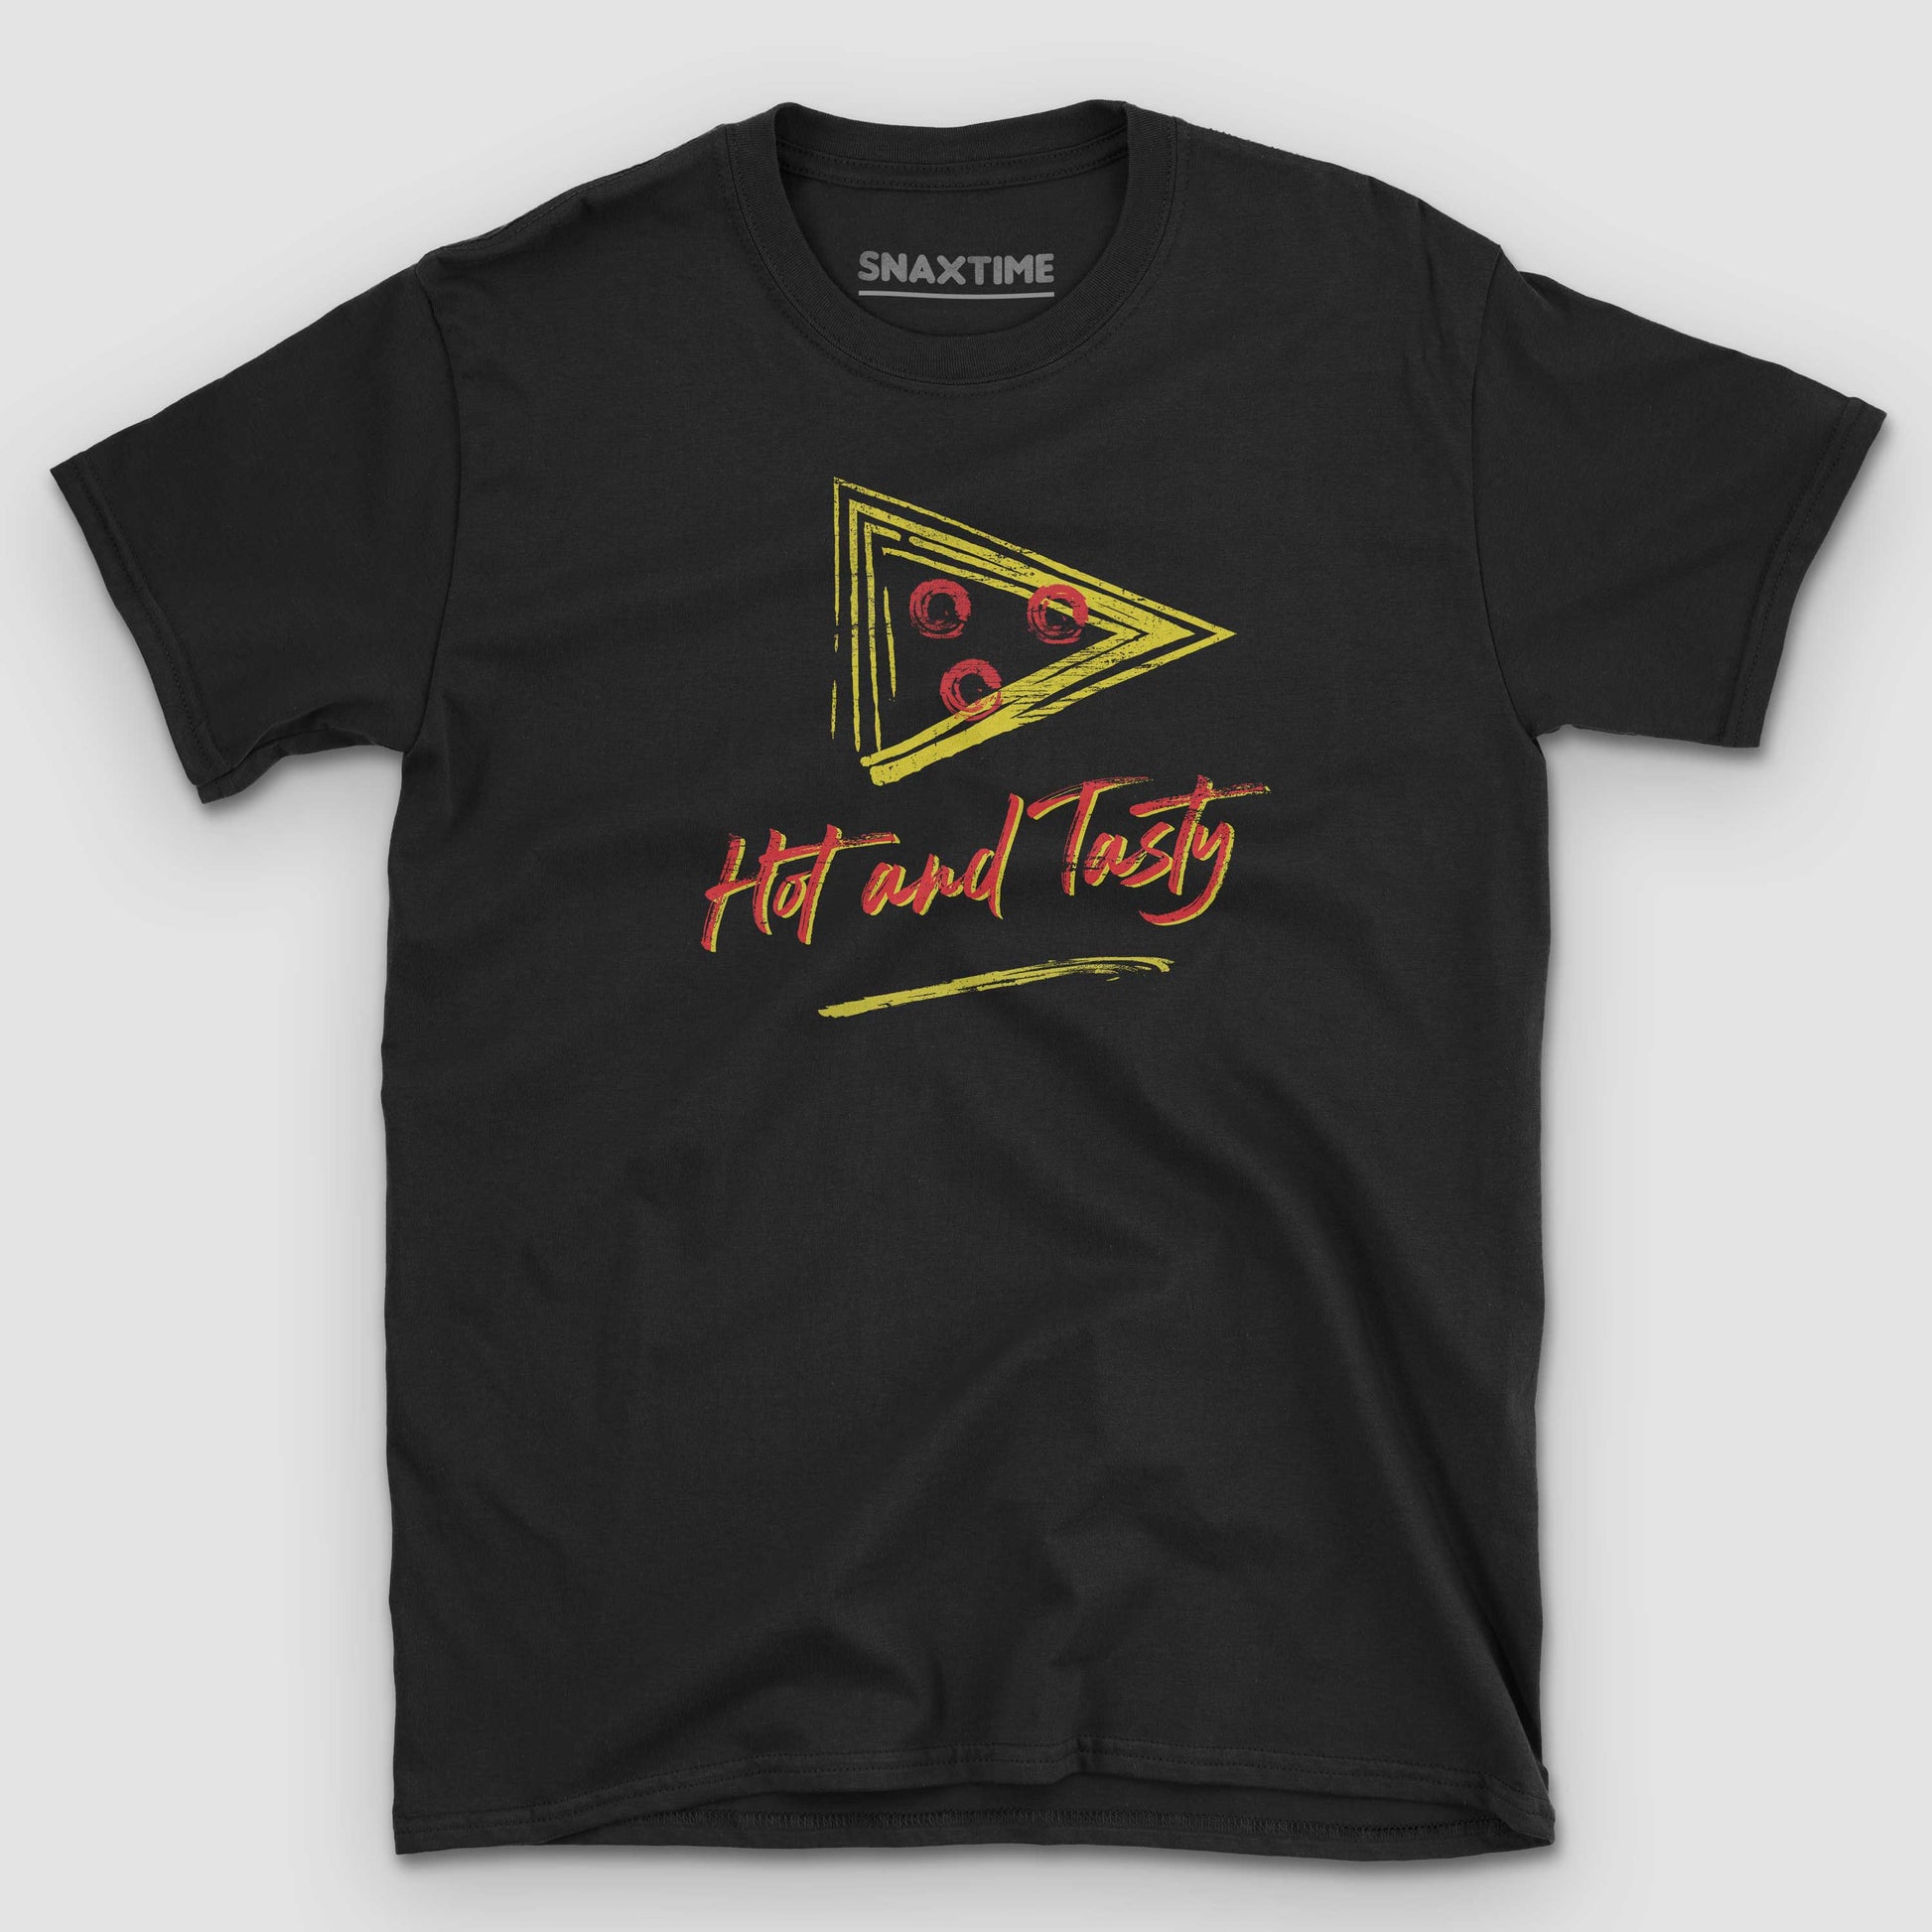  Retro Hot & Tasty Pizza Graphic T-Shirt by Snaxtime